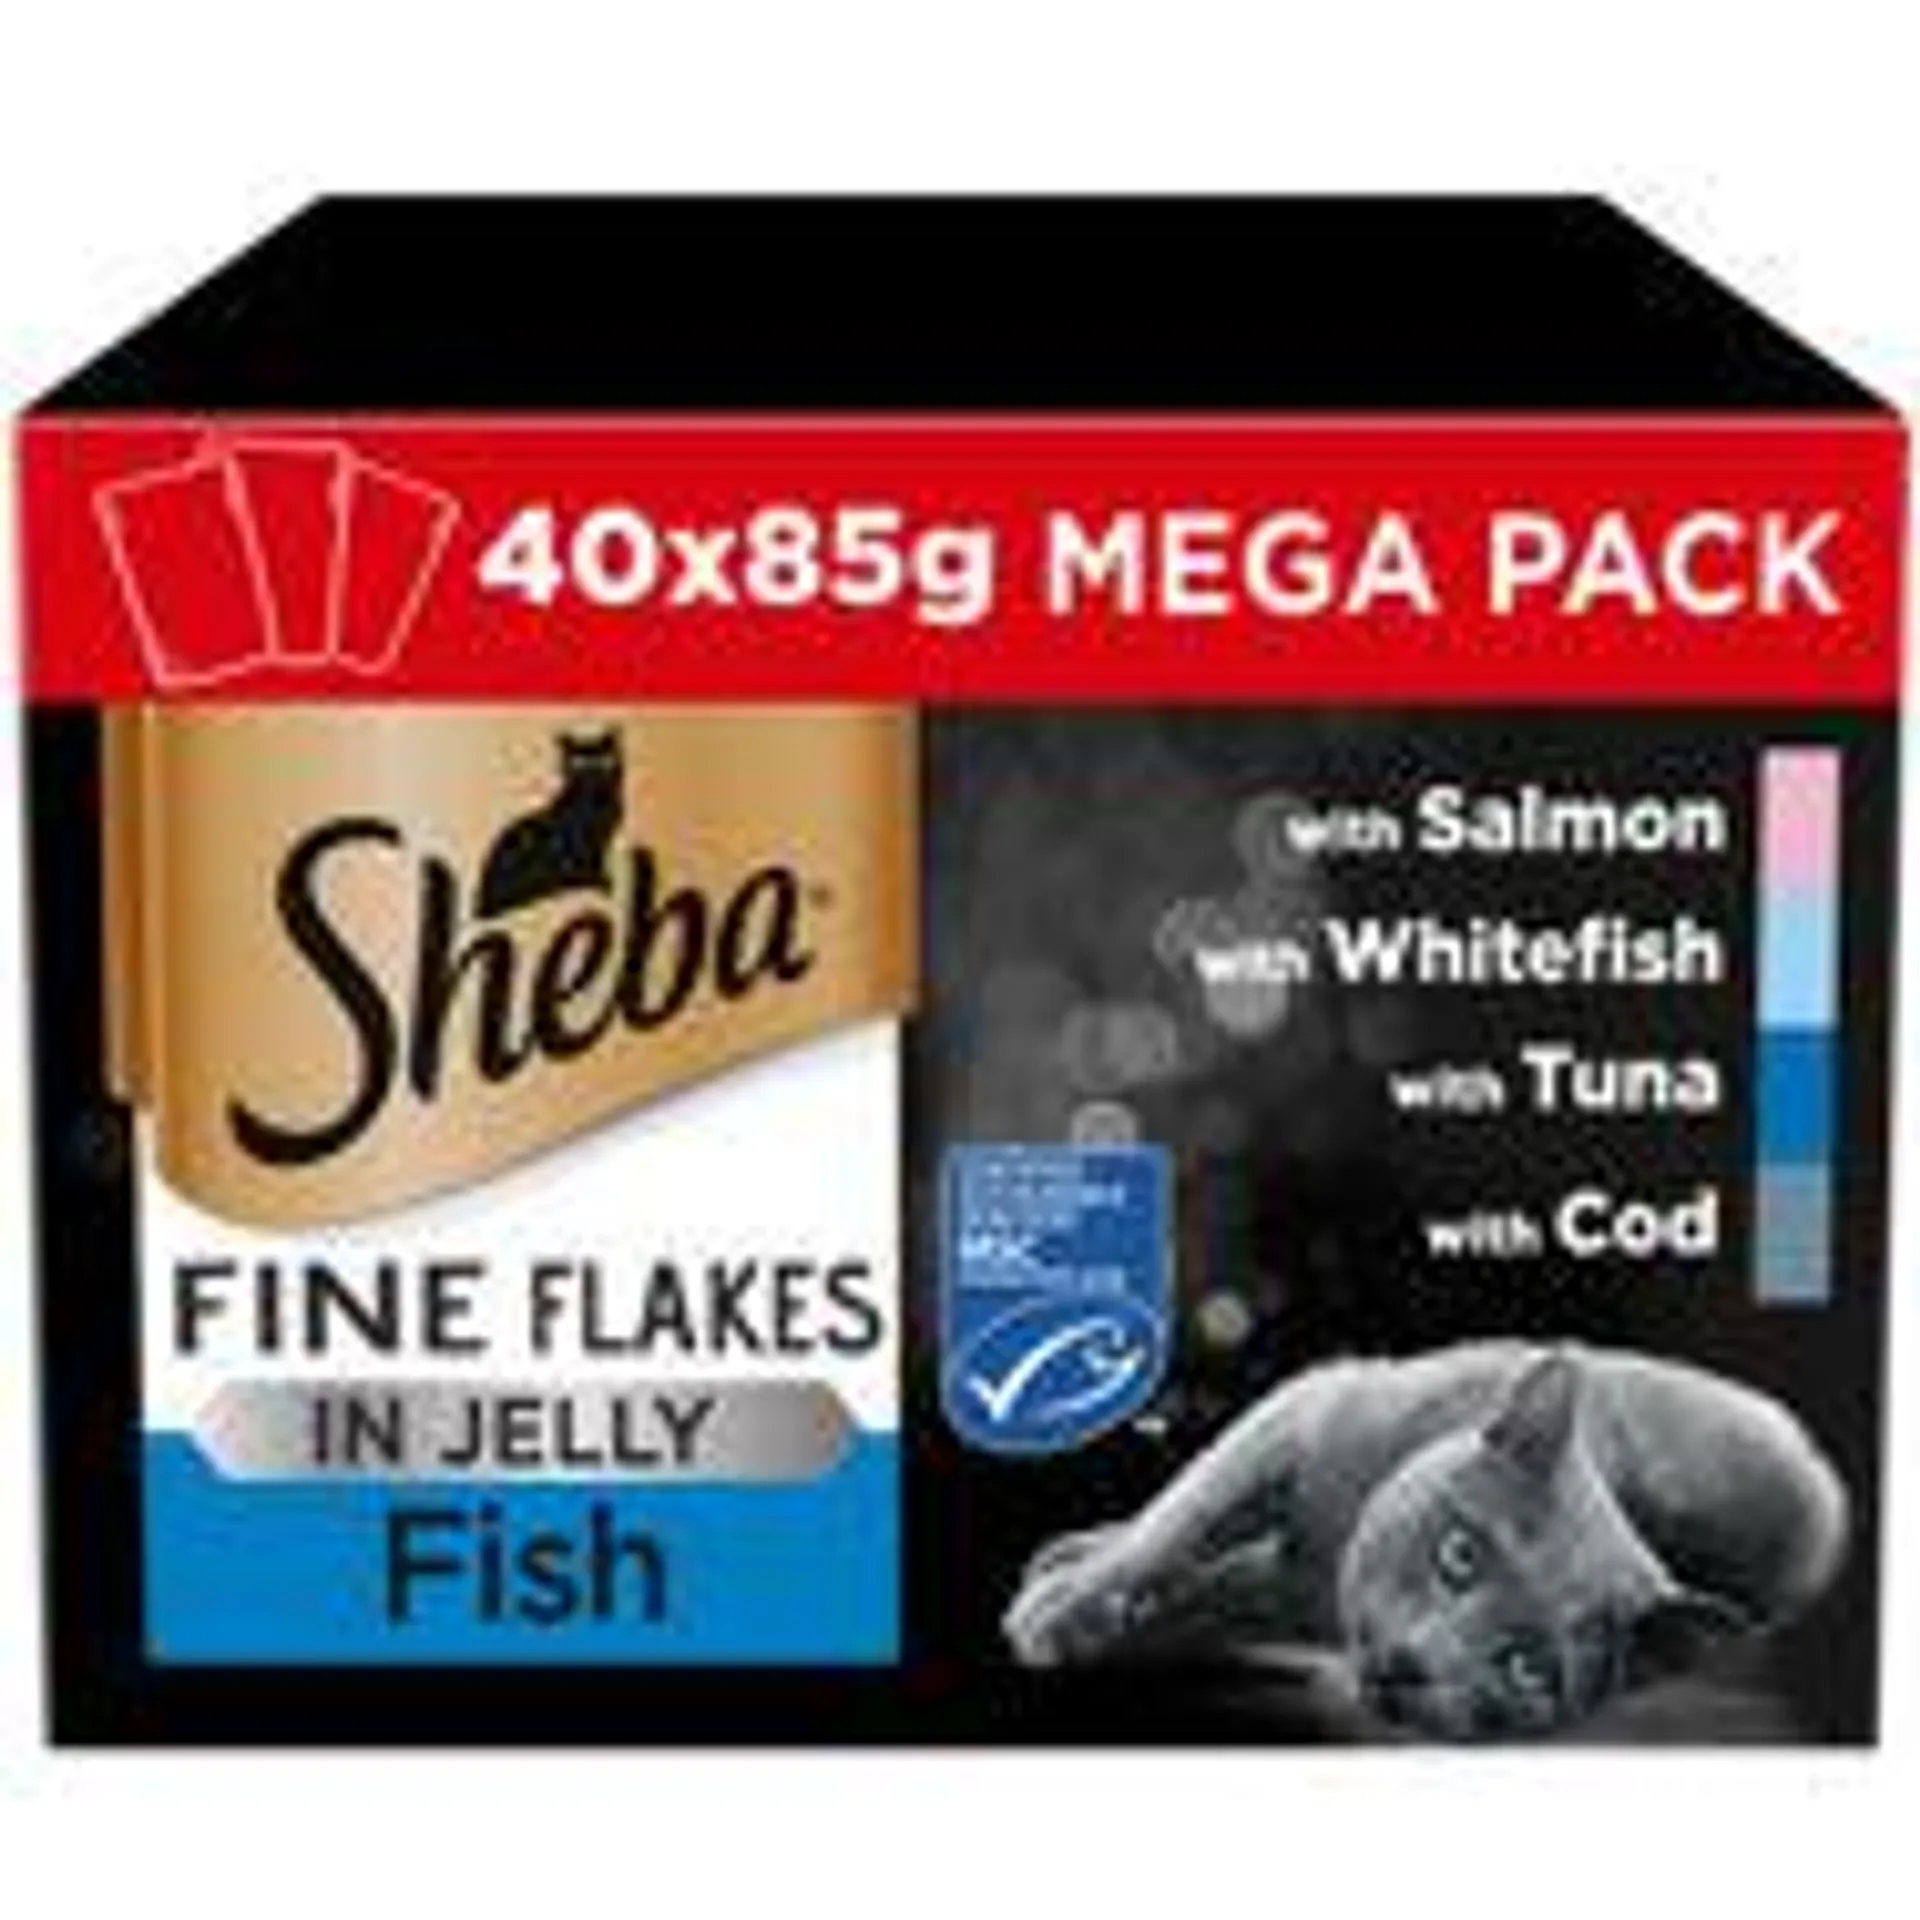 Sheba Fine Flakes Fish Selection in Jelly Adult Cat Food Pouches